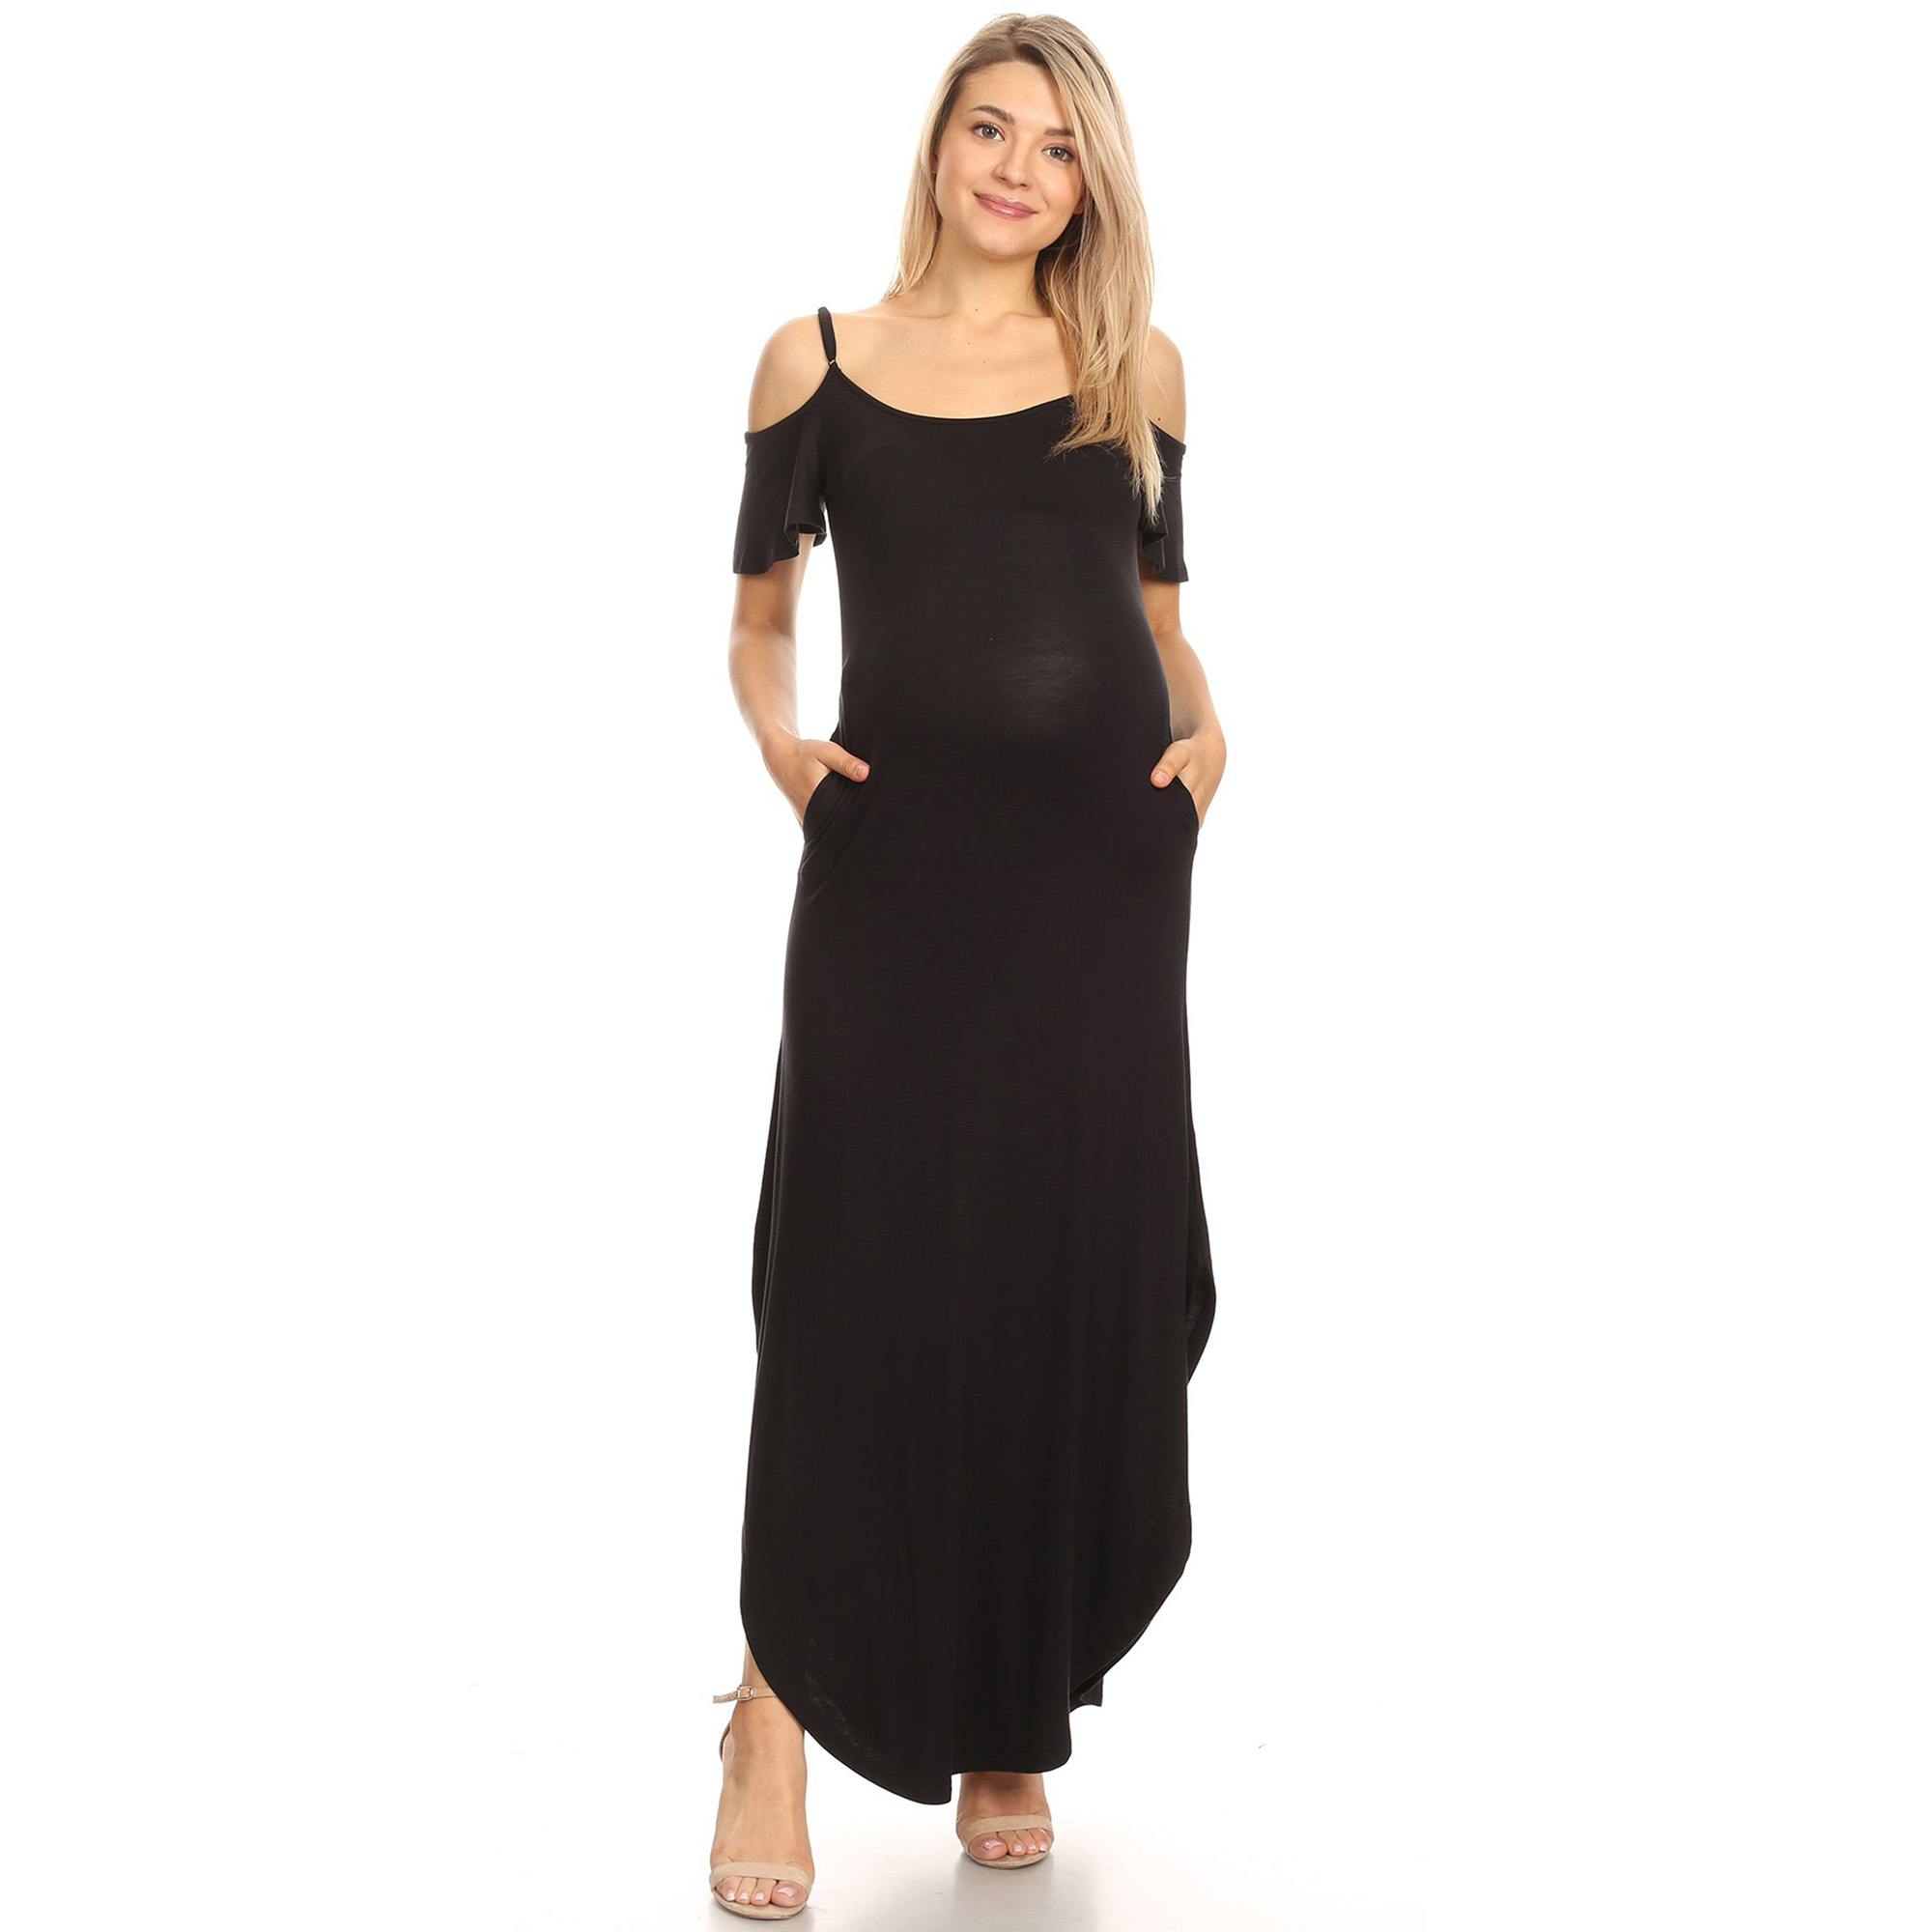 White Mark Women's Maternity Cold Shoulder Maxi Dress - Charcoal, 3X